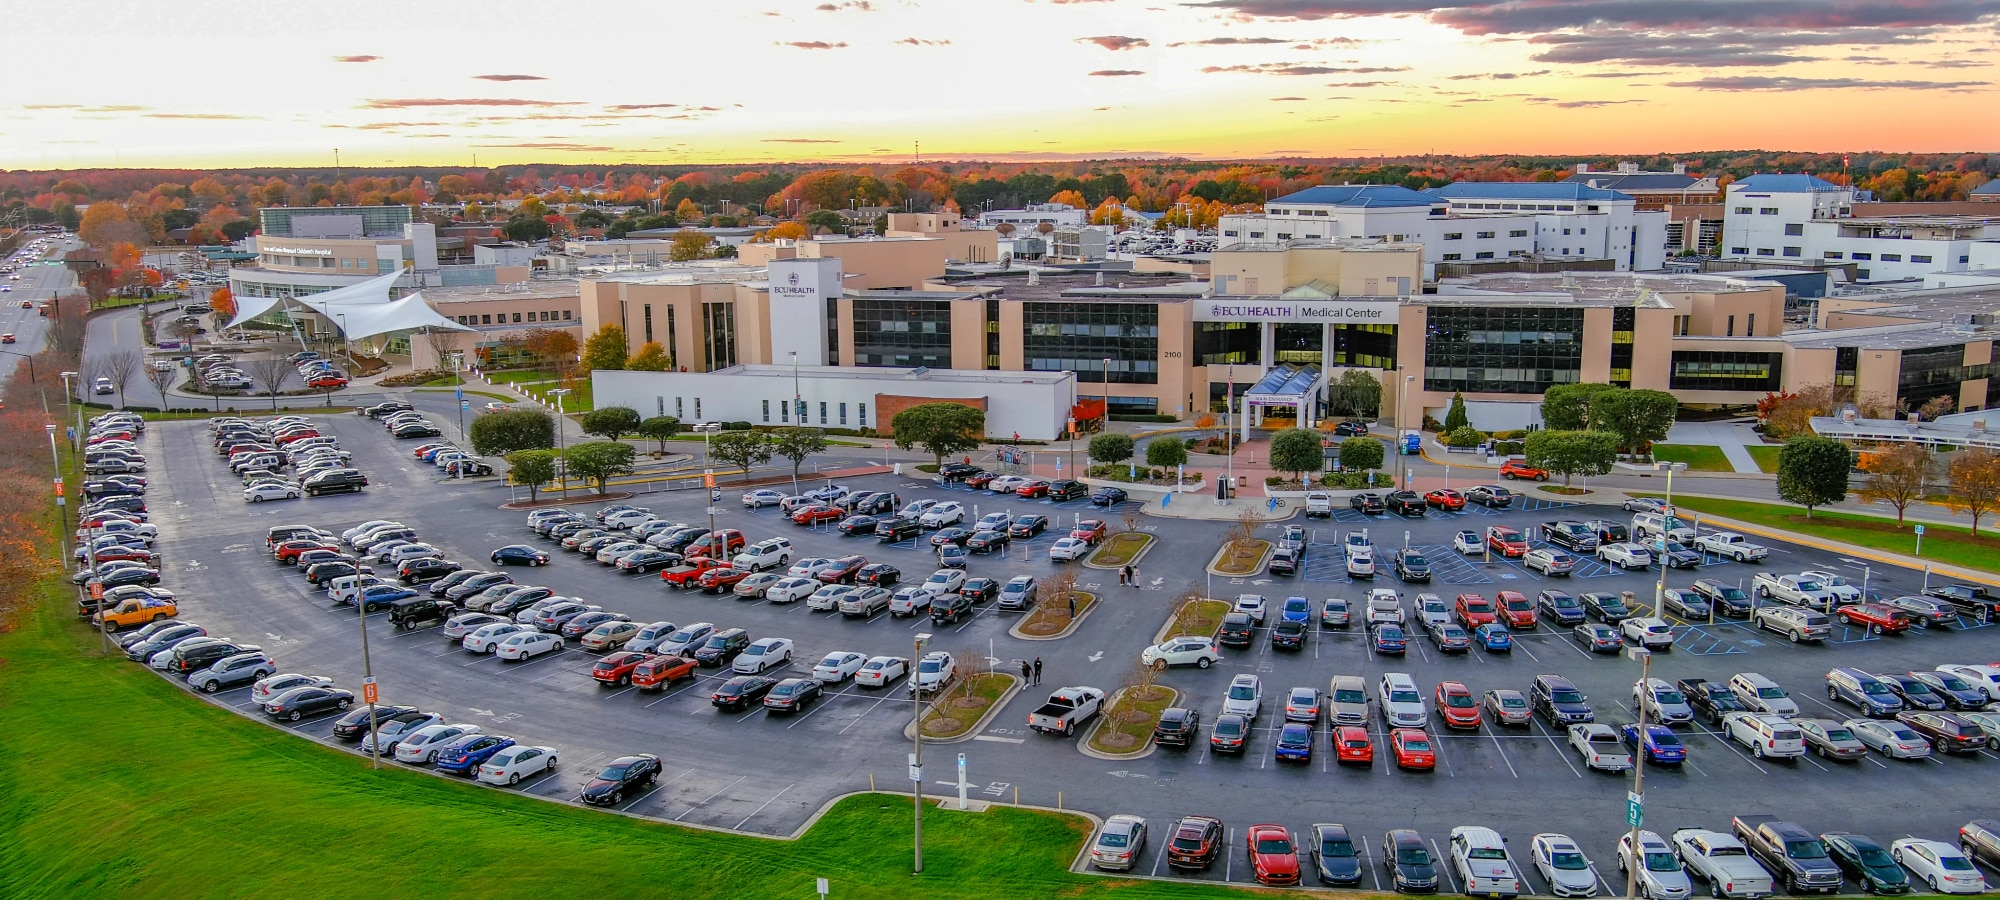 Drone footage shows ECU Health Medical Center in Greenville at sunset.